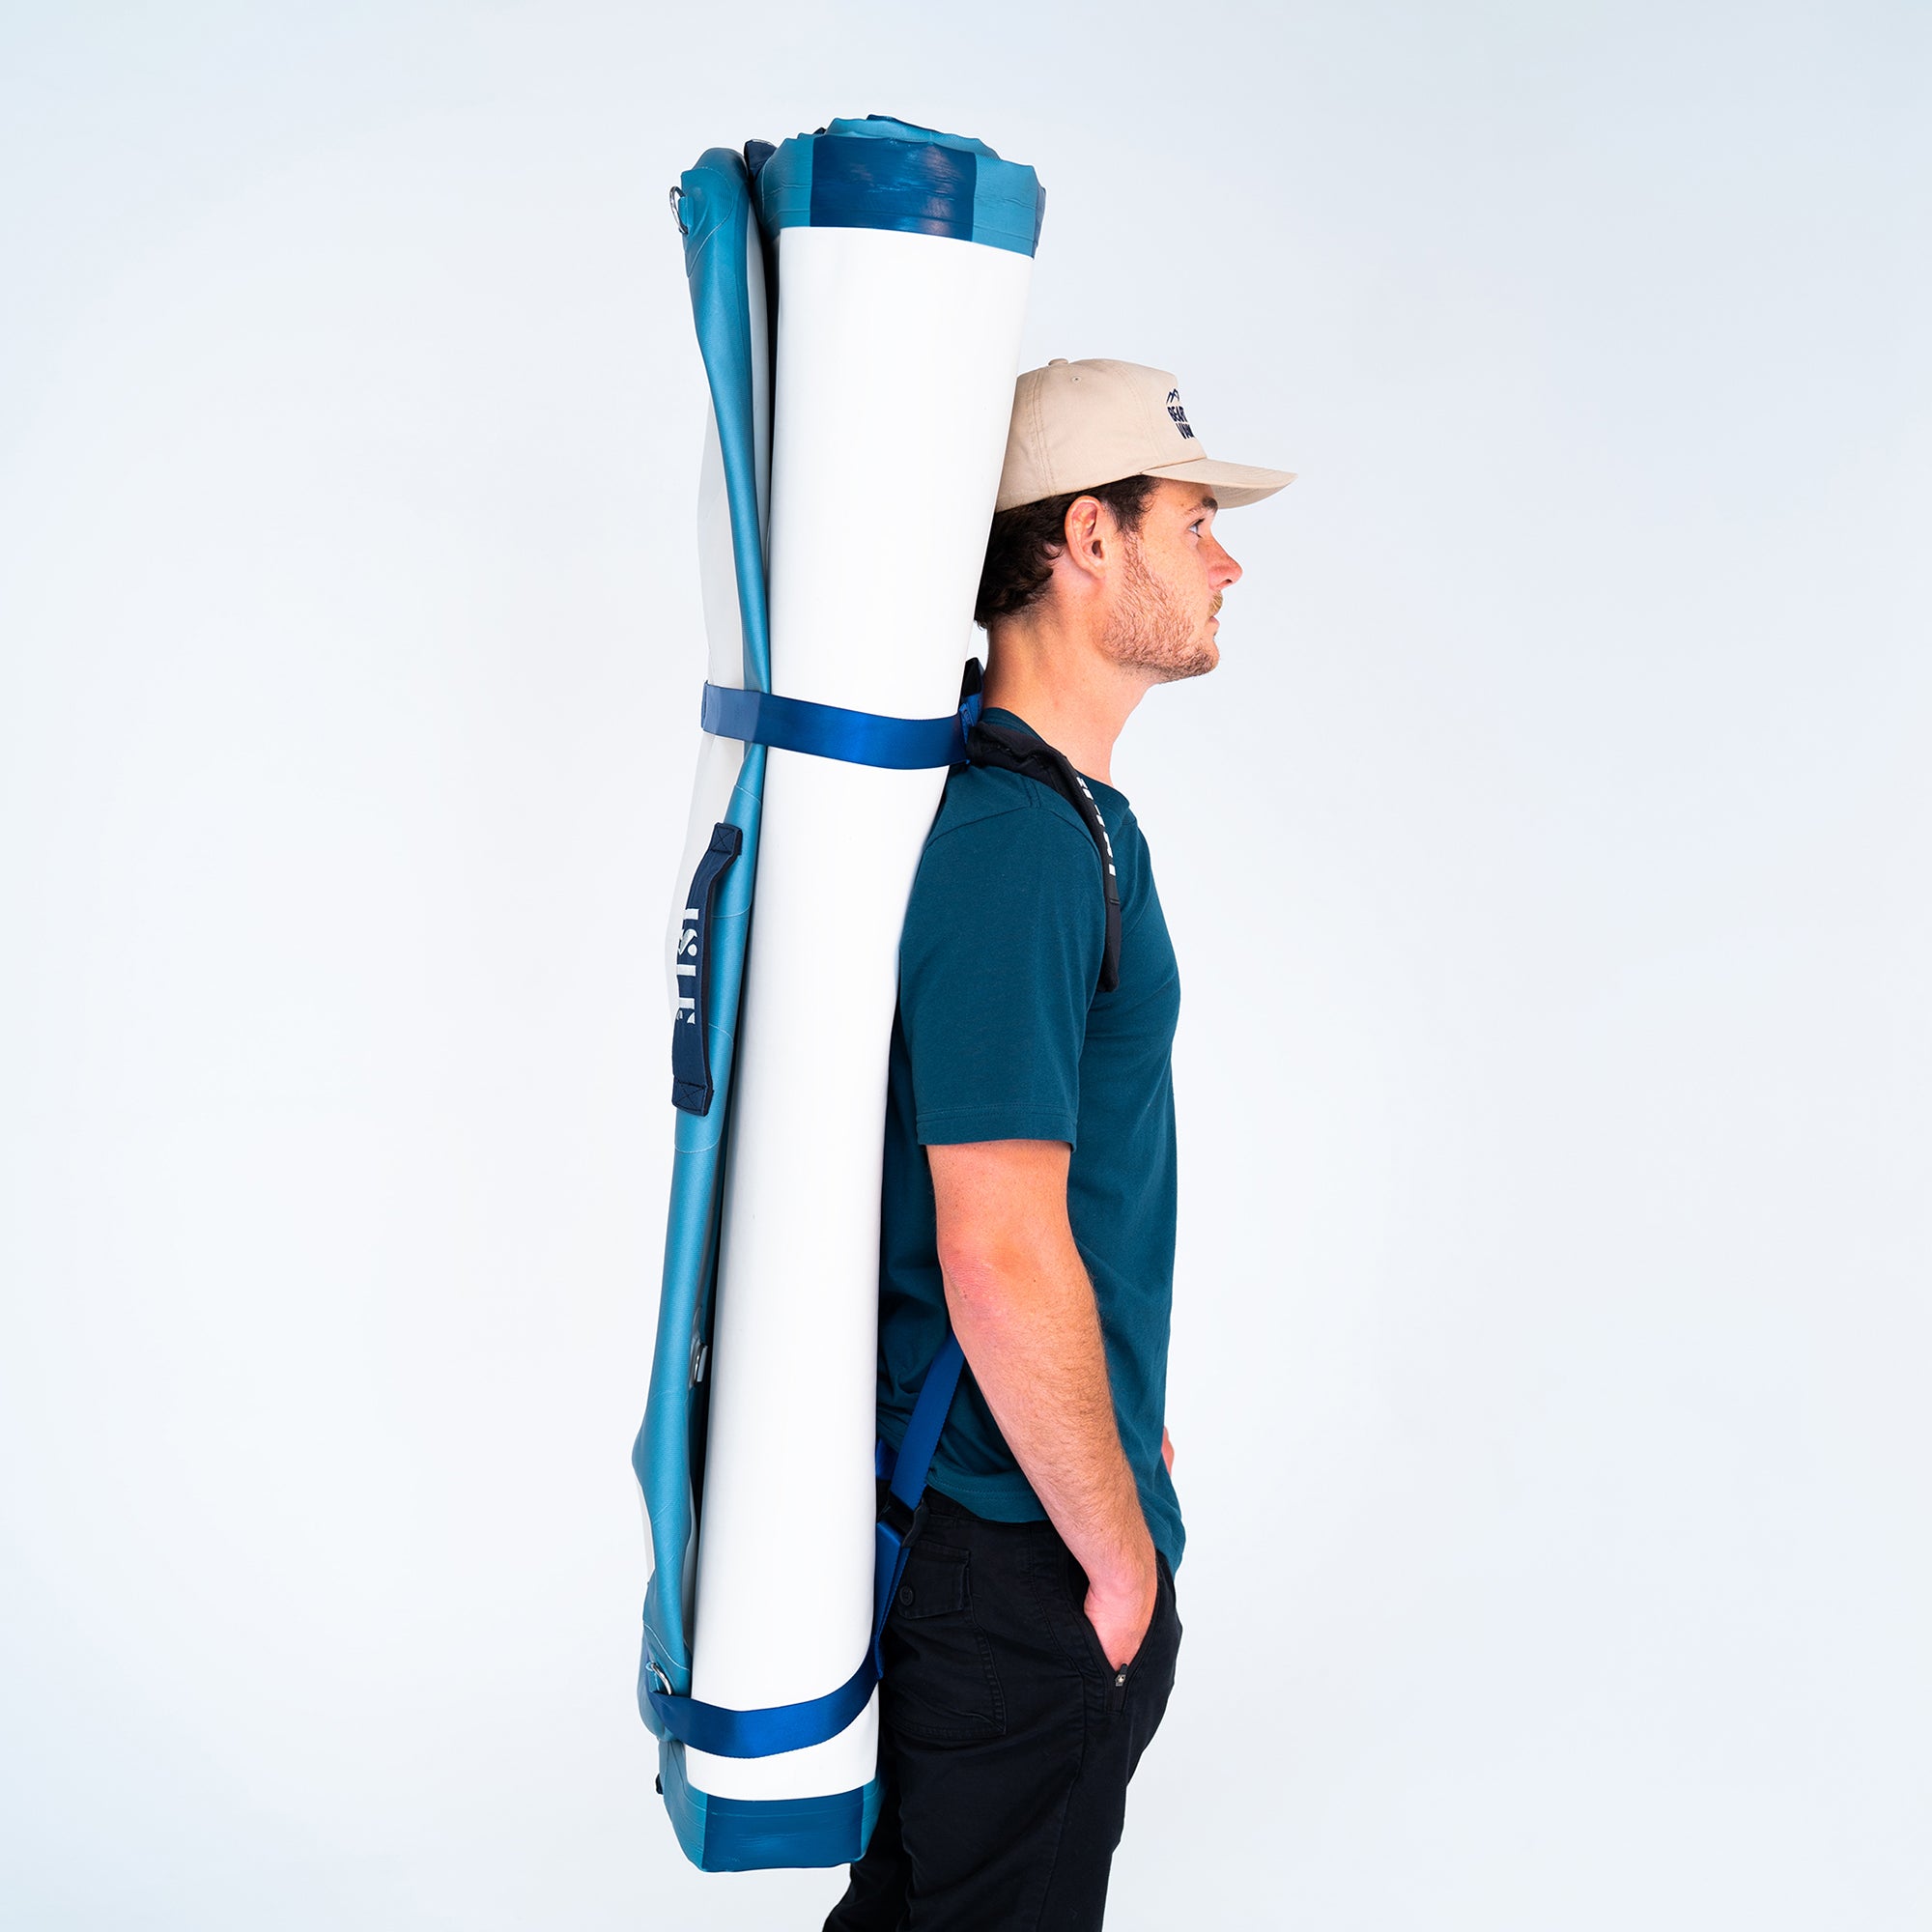 Man Carrying A Dock Using The Minimalist Carry System As A Backpack